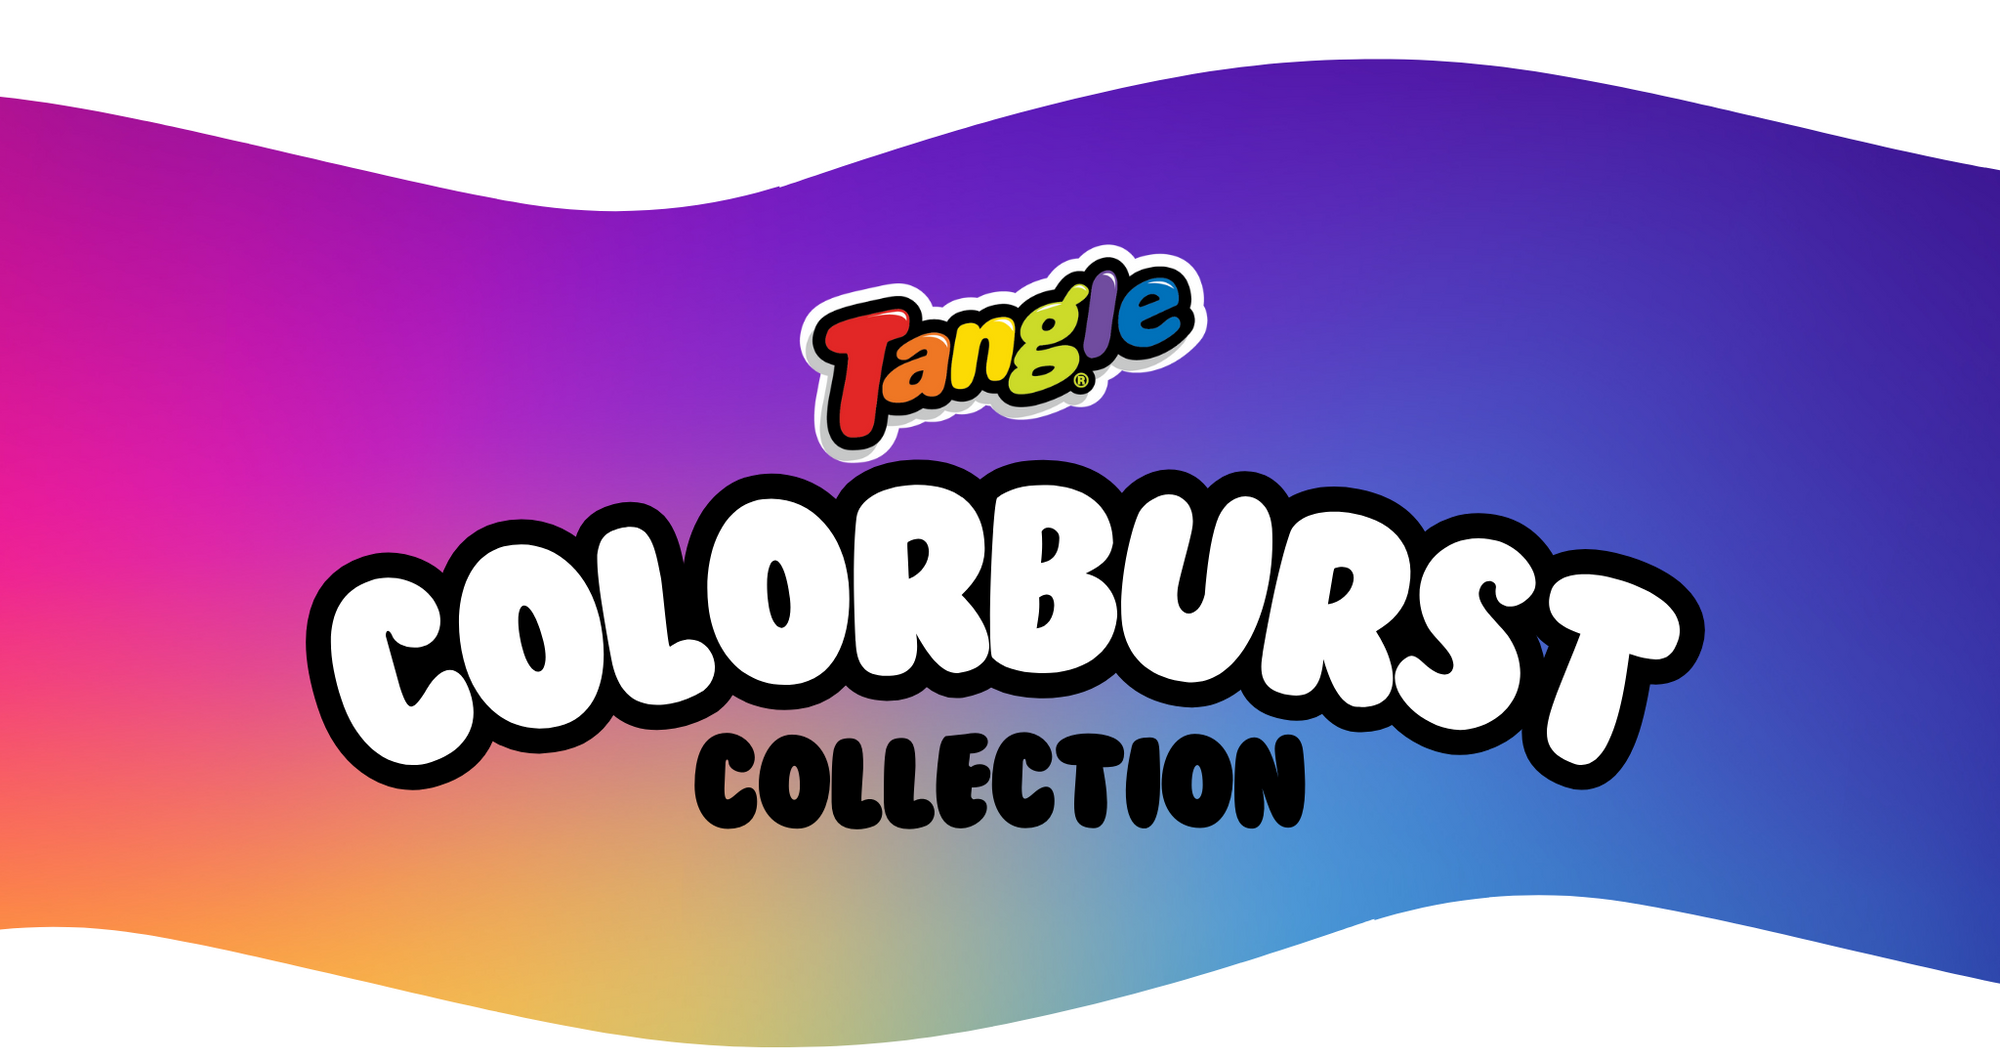 Tangle Colorburst Collection